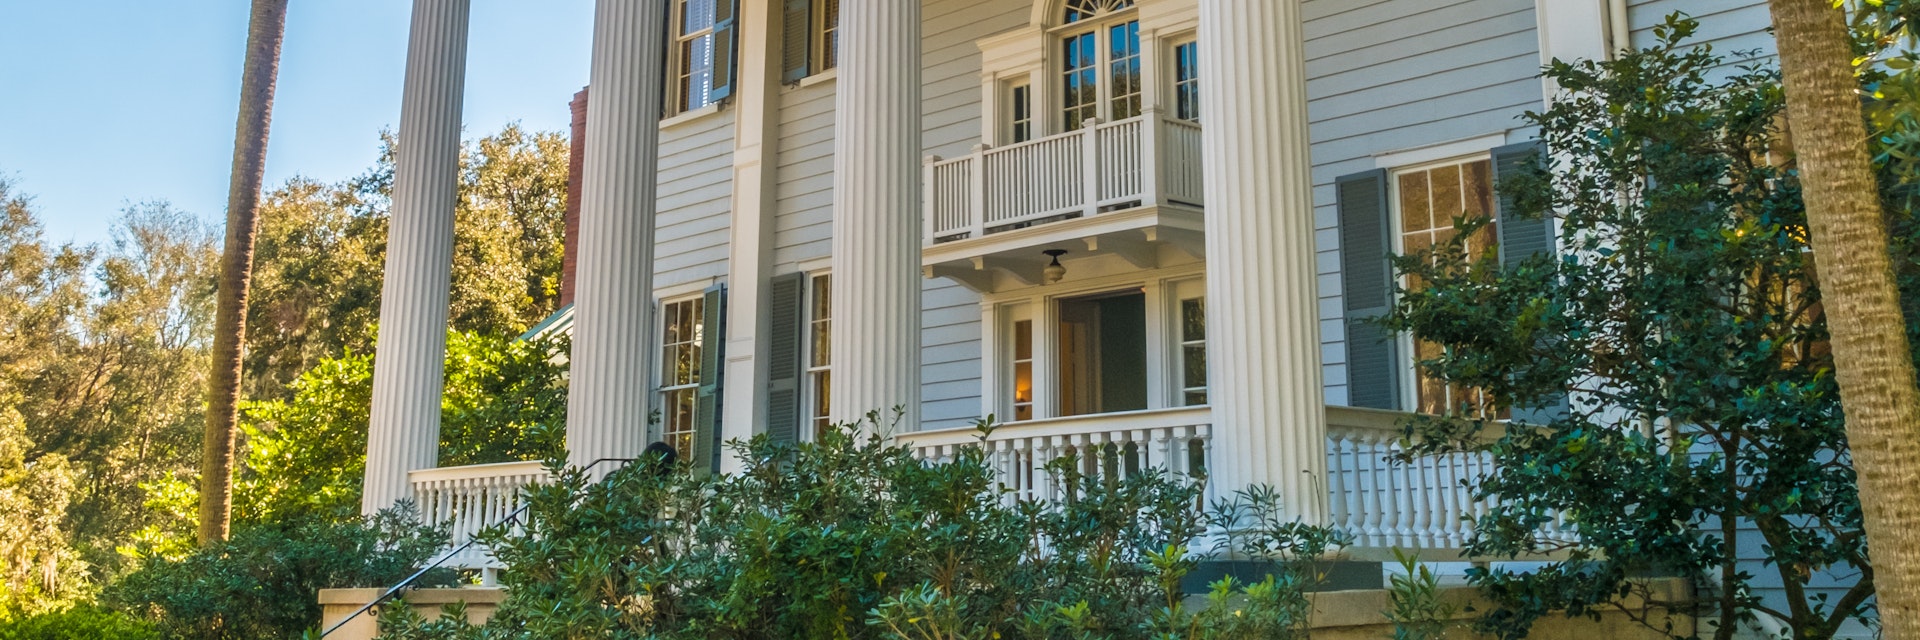 The Georgian-style mansion at the historical McLeod plantation.